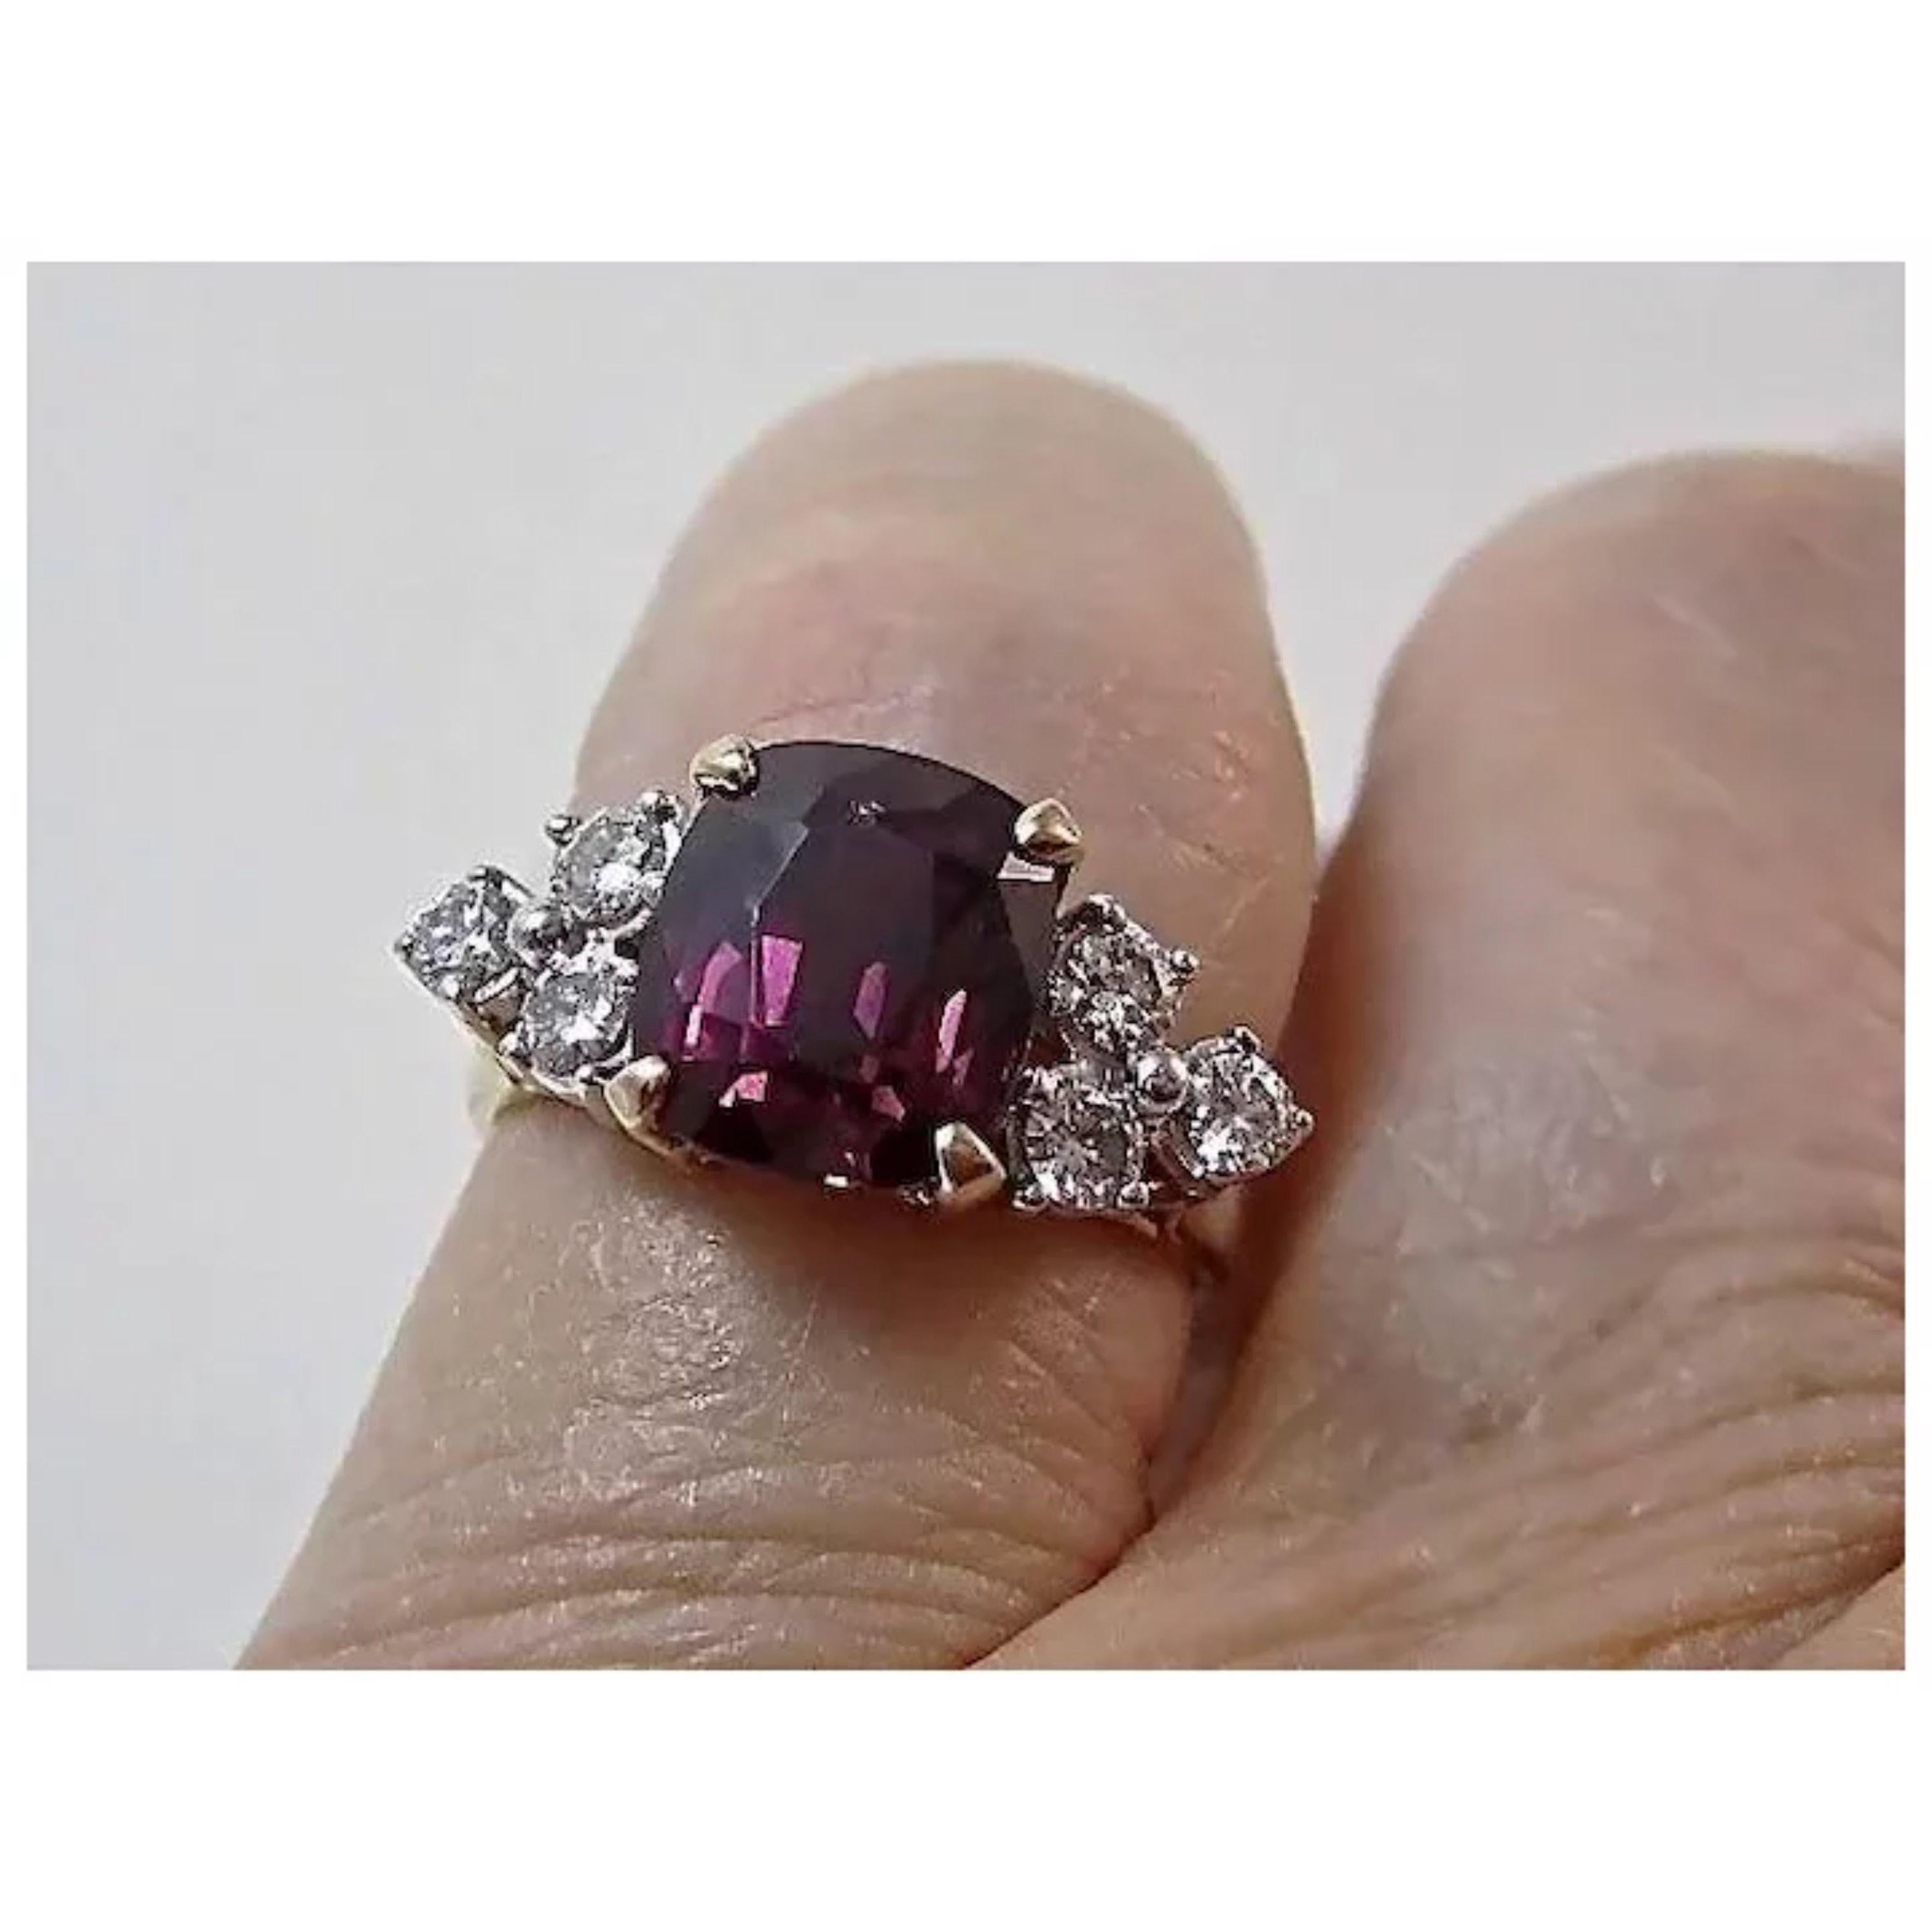 For Sale:  2 Carat Cushion Cut Ruby Diamond Engagement Ring, Ruby Diamond Cocktail Ring 5